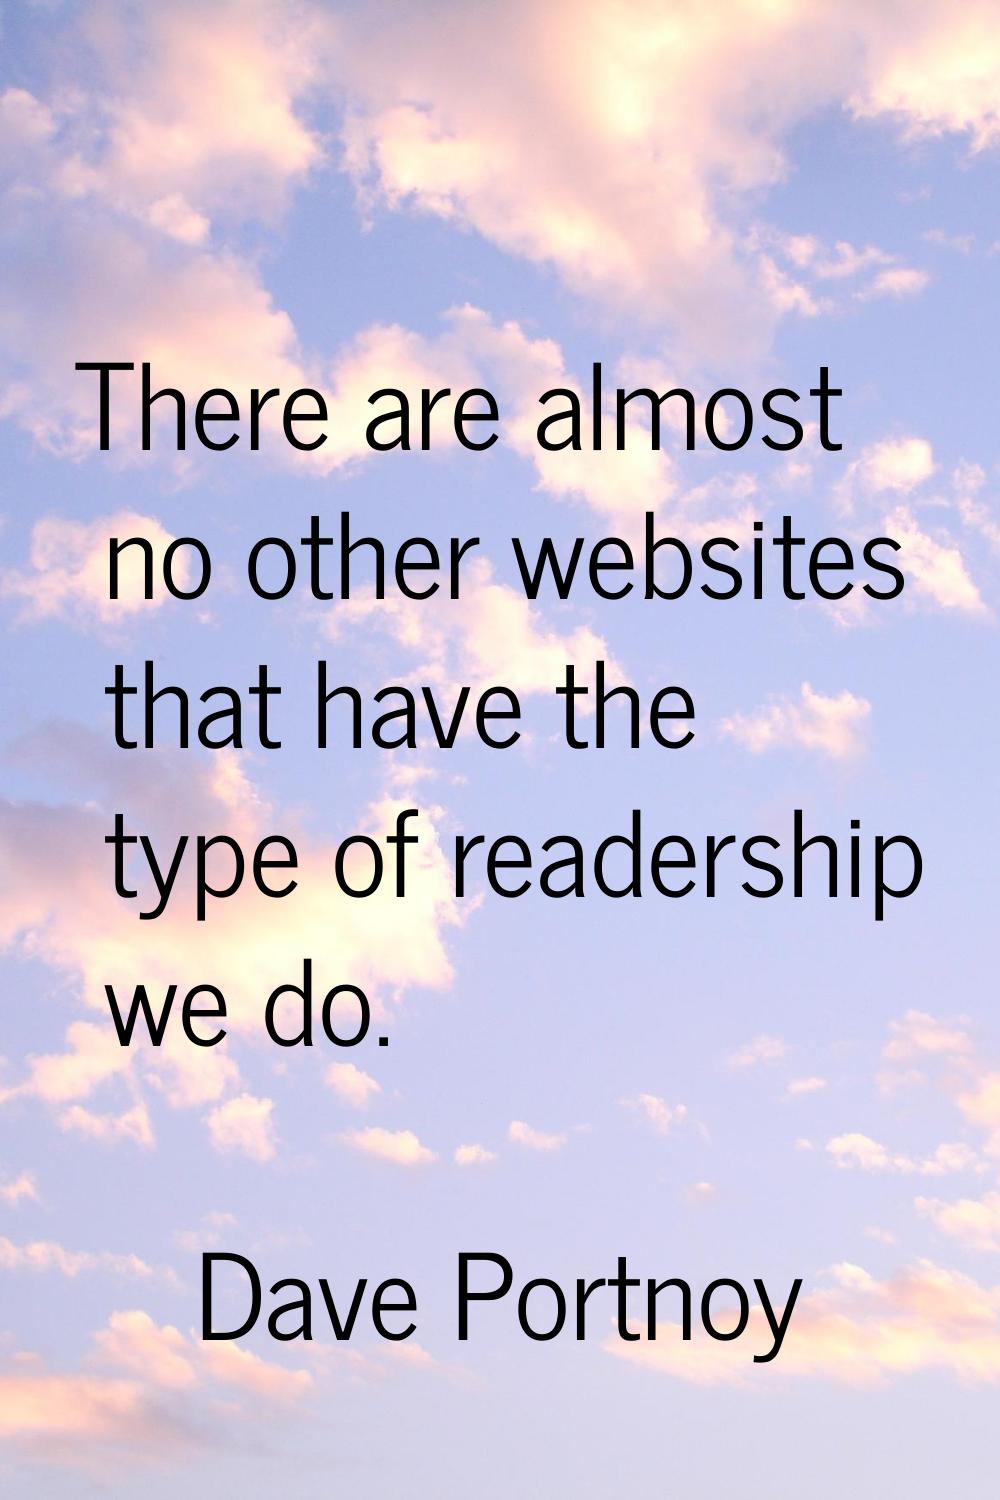 There are almost no other websites that have the type of readership we do.